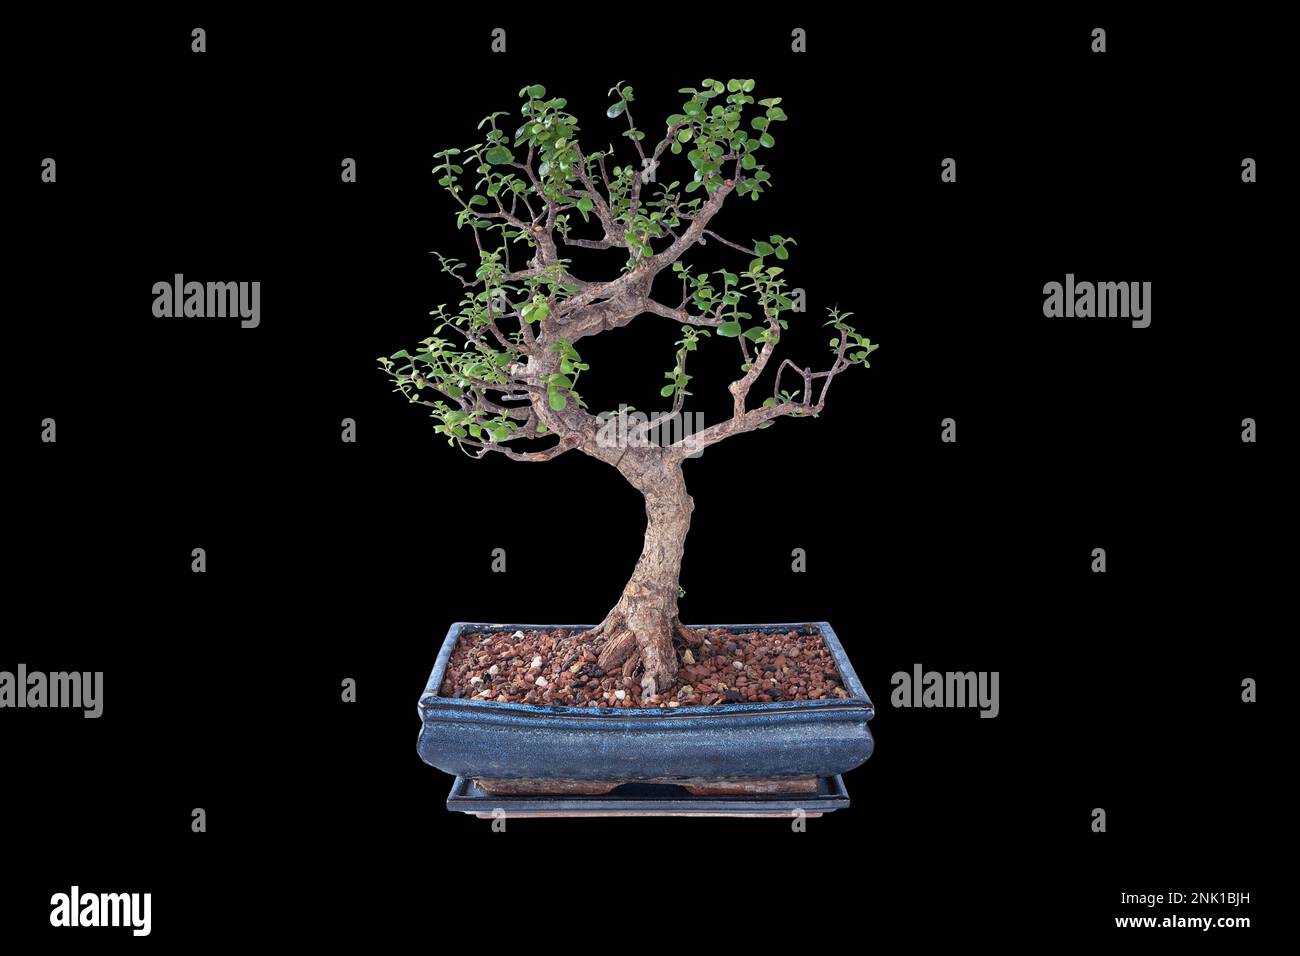 Portulacaria afra isolated large bonsai; money tree or elephant bush, this is a succulent plant suitable for bonsai art Stock Photo